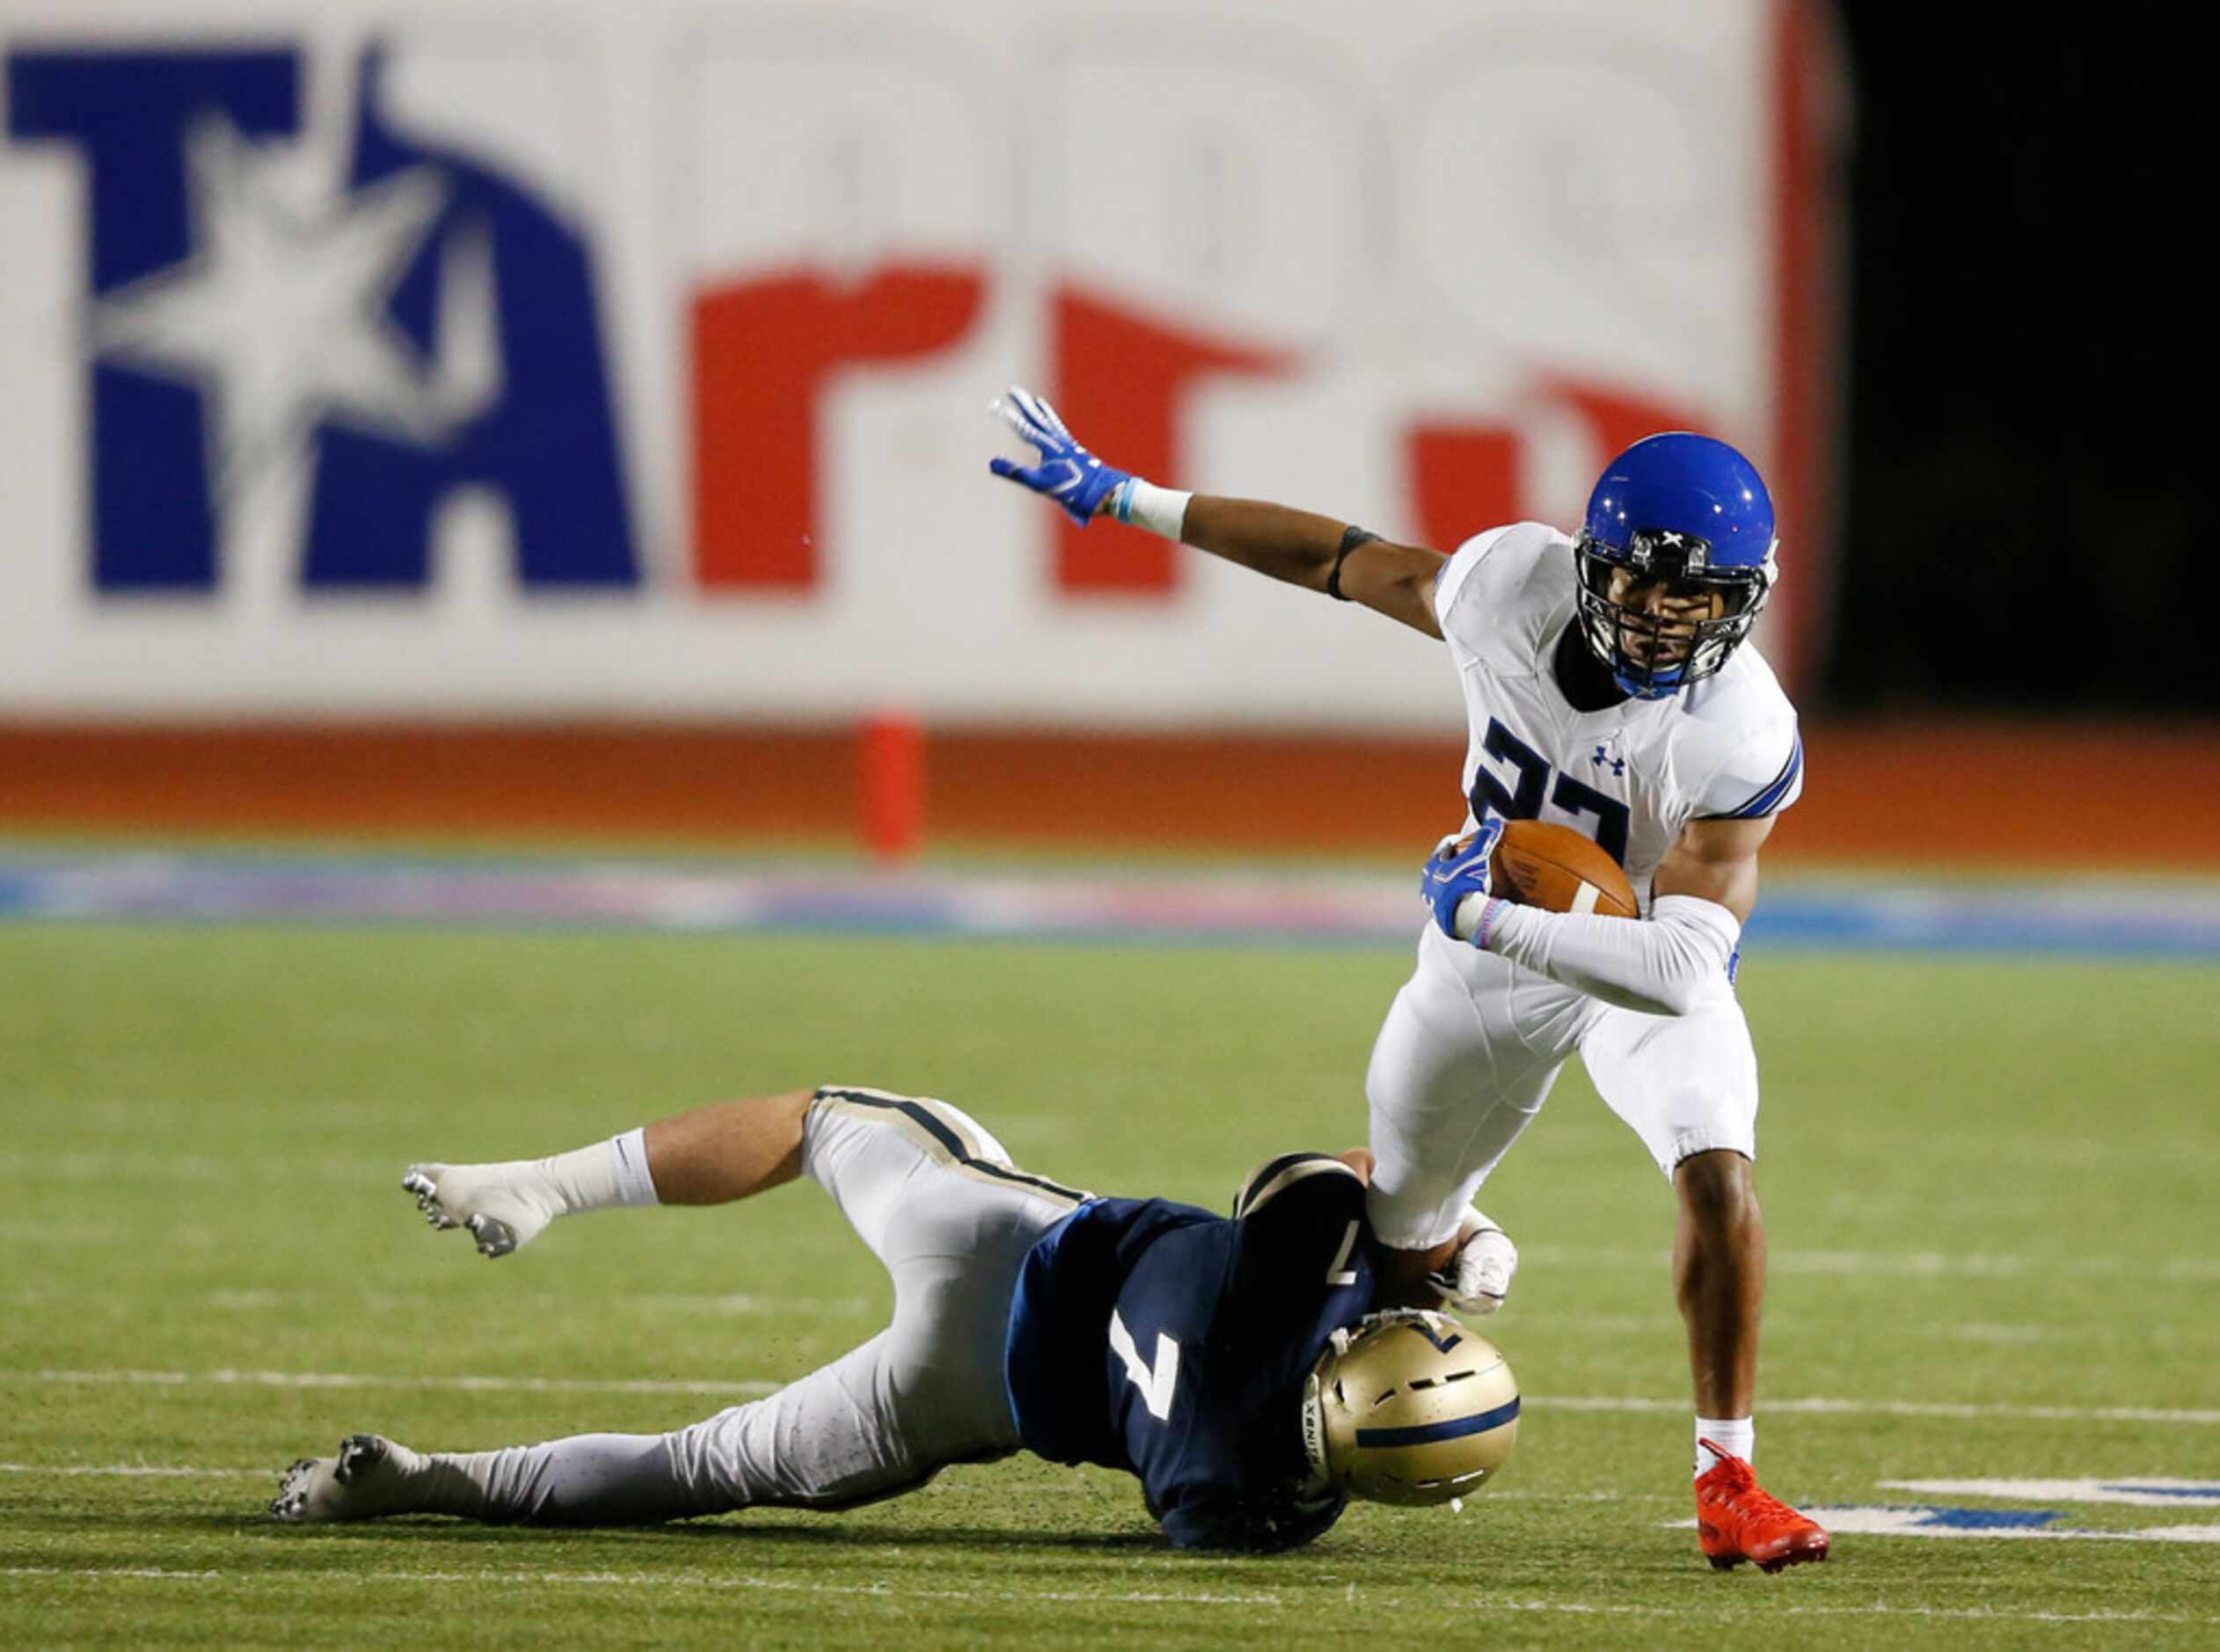 Trinity Christian's Desmond Moultrie (23) is tackled by Austin Regents William Raeder (7)...